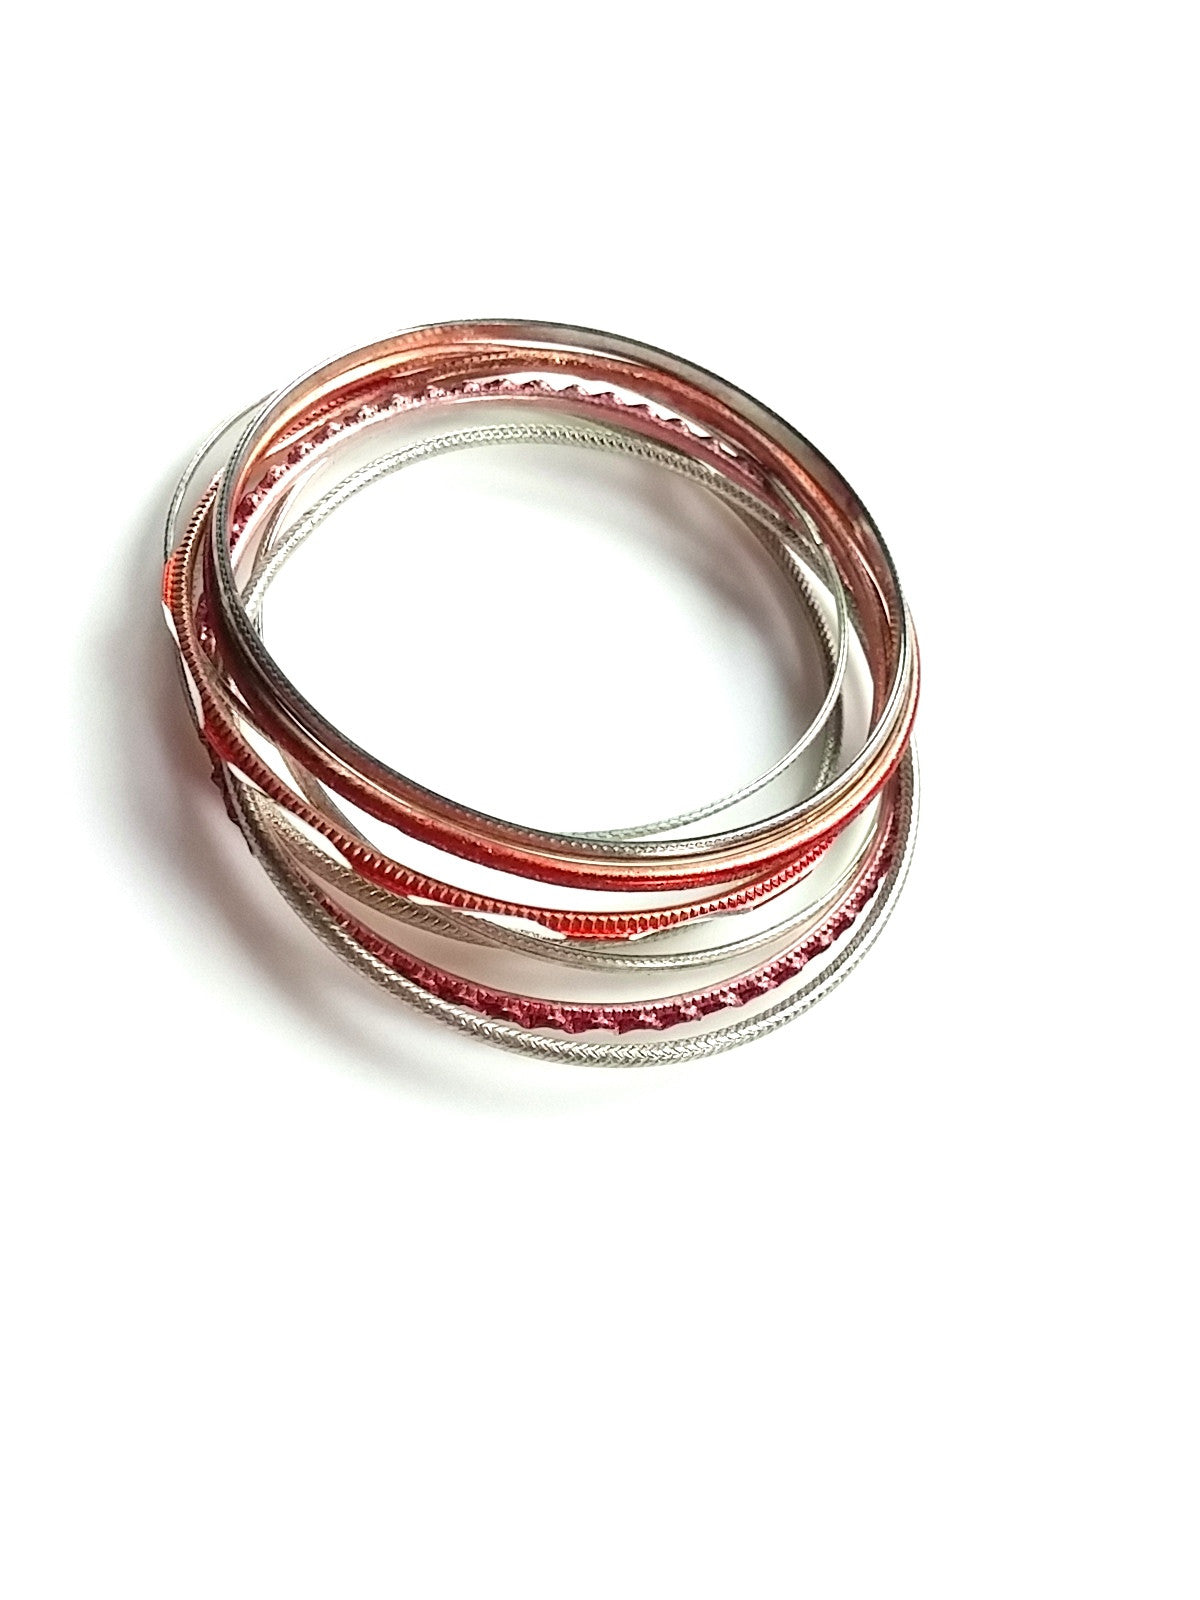 Classic 80s Bangle Bracelets - Silver Tone Red Accents Funky Mixed Styles- Make a Statement - Dirty 30 Vintage | Vintage Clothing, Vintage Jewelry, Vintage Accessories